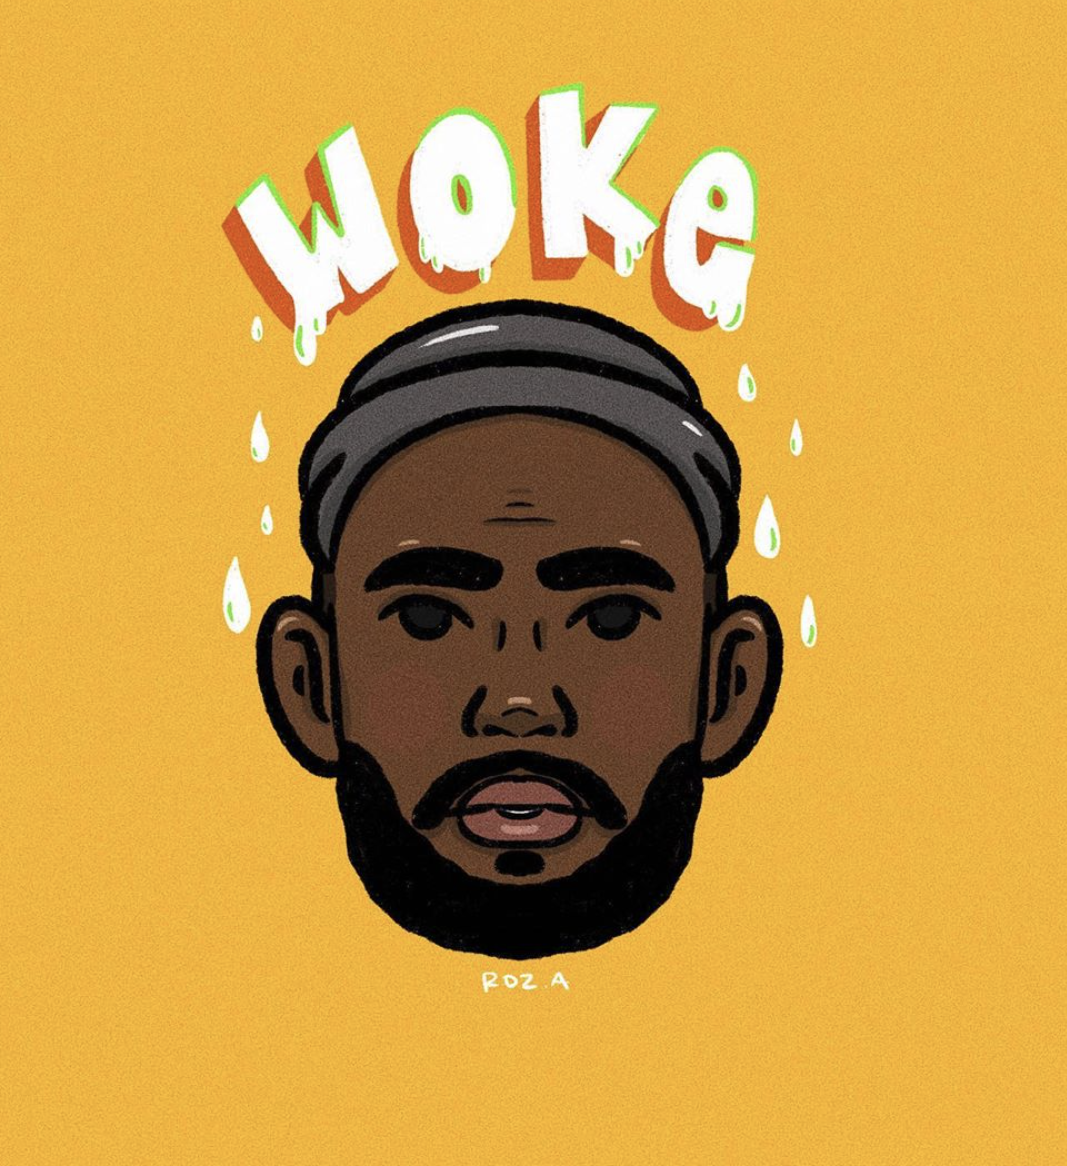 “Woke” is Insightful, Quirky and Timely – TV Wasteland